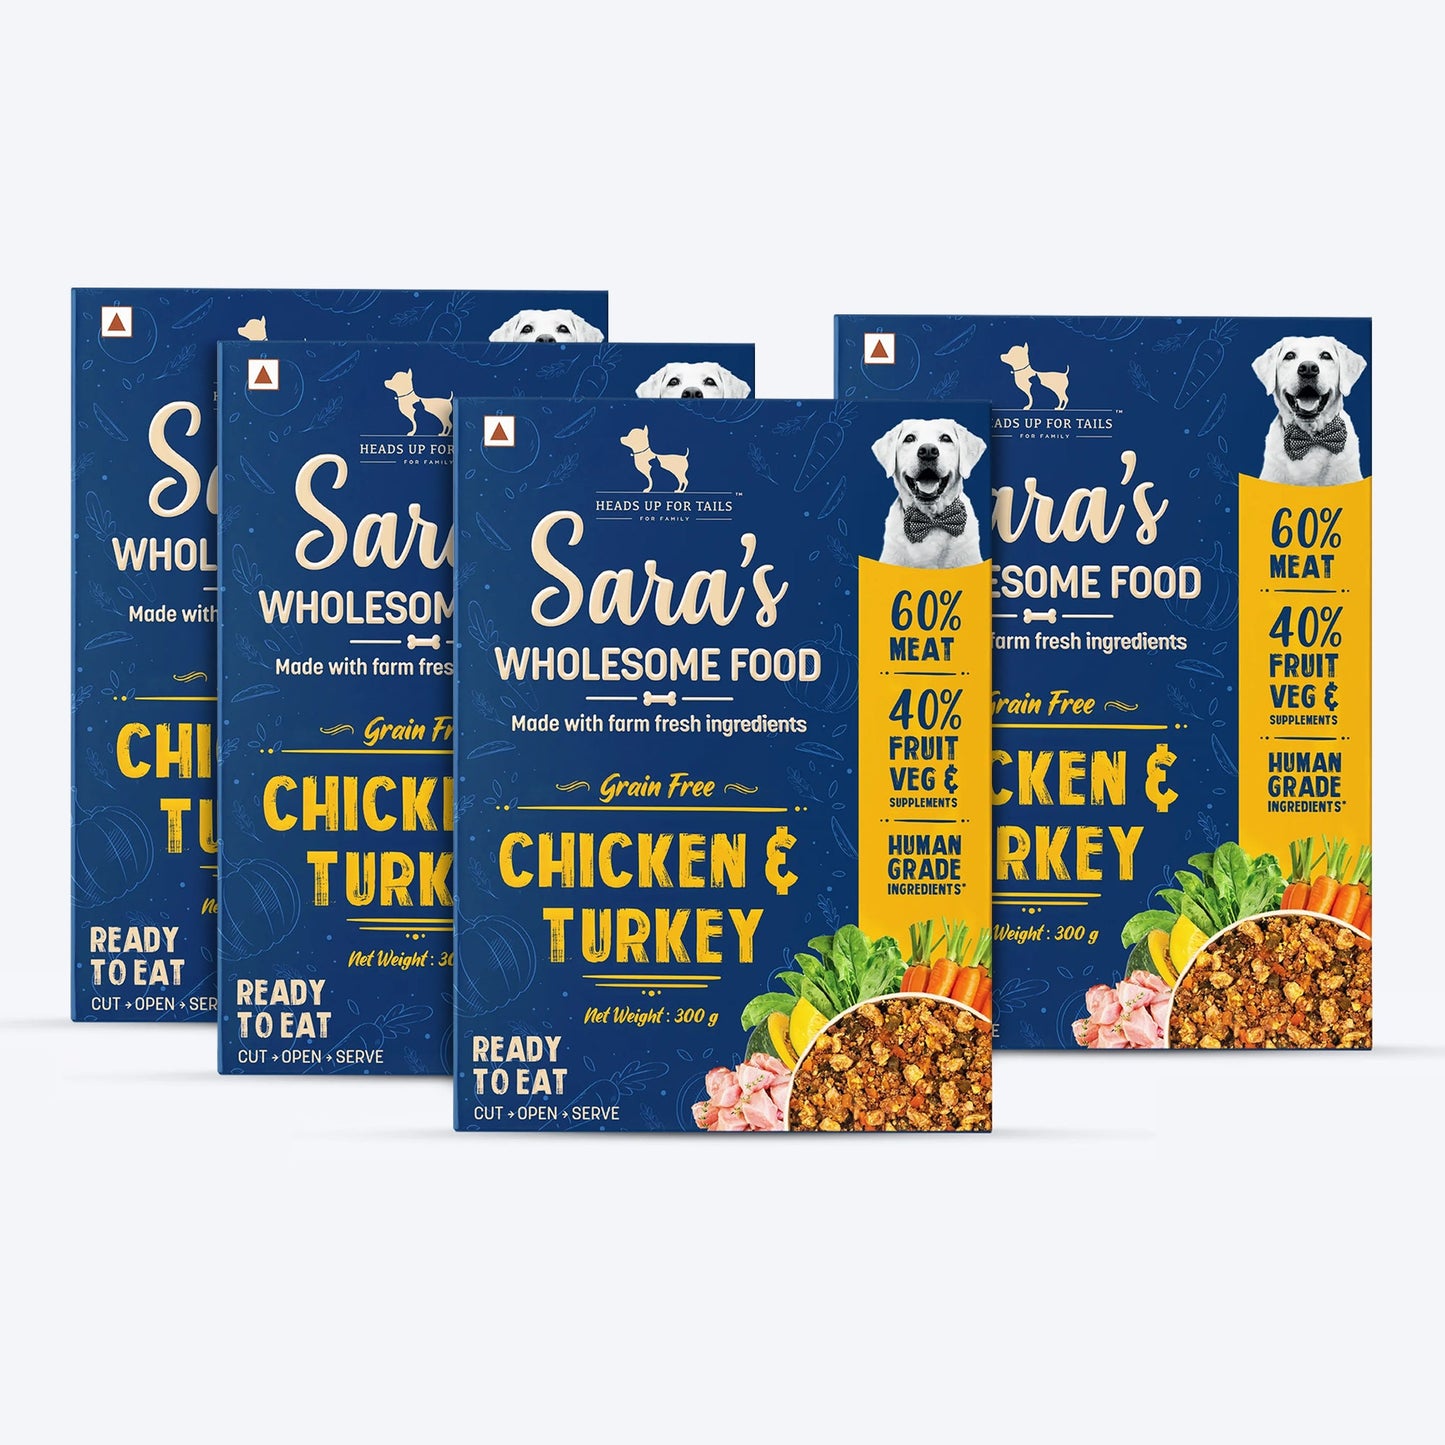 HUFT Sara's Wholesome Food - Grain-Free Chicken And Turkey Dog Food (300gm Pack)